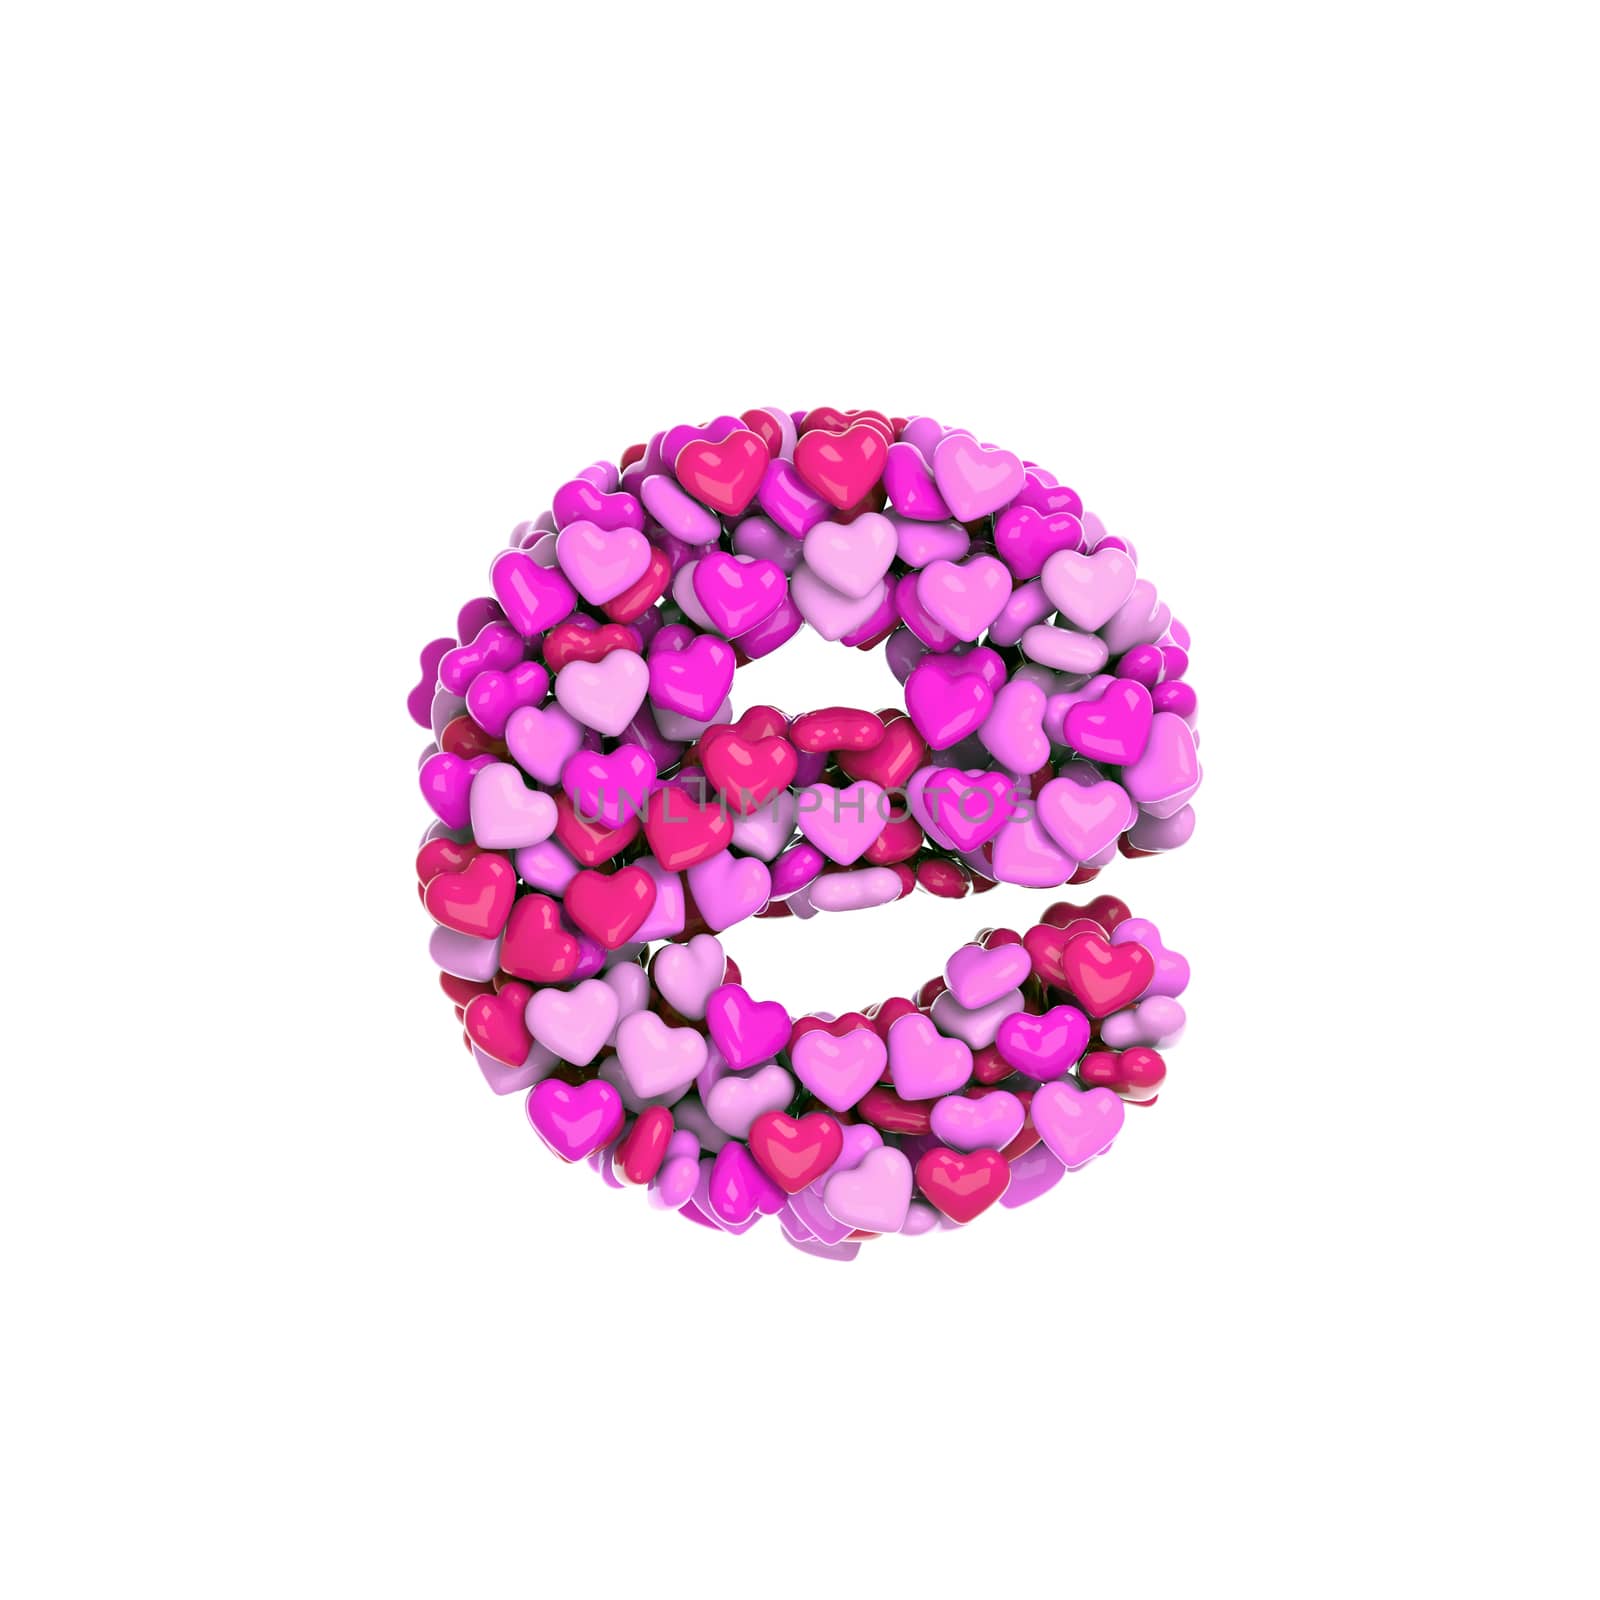 Valentine letter E - Small 3d pink hearts font isolated on white background. This alphabet is perfect for creative illustrations related but not limited to Love, passion, wedding...